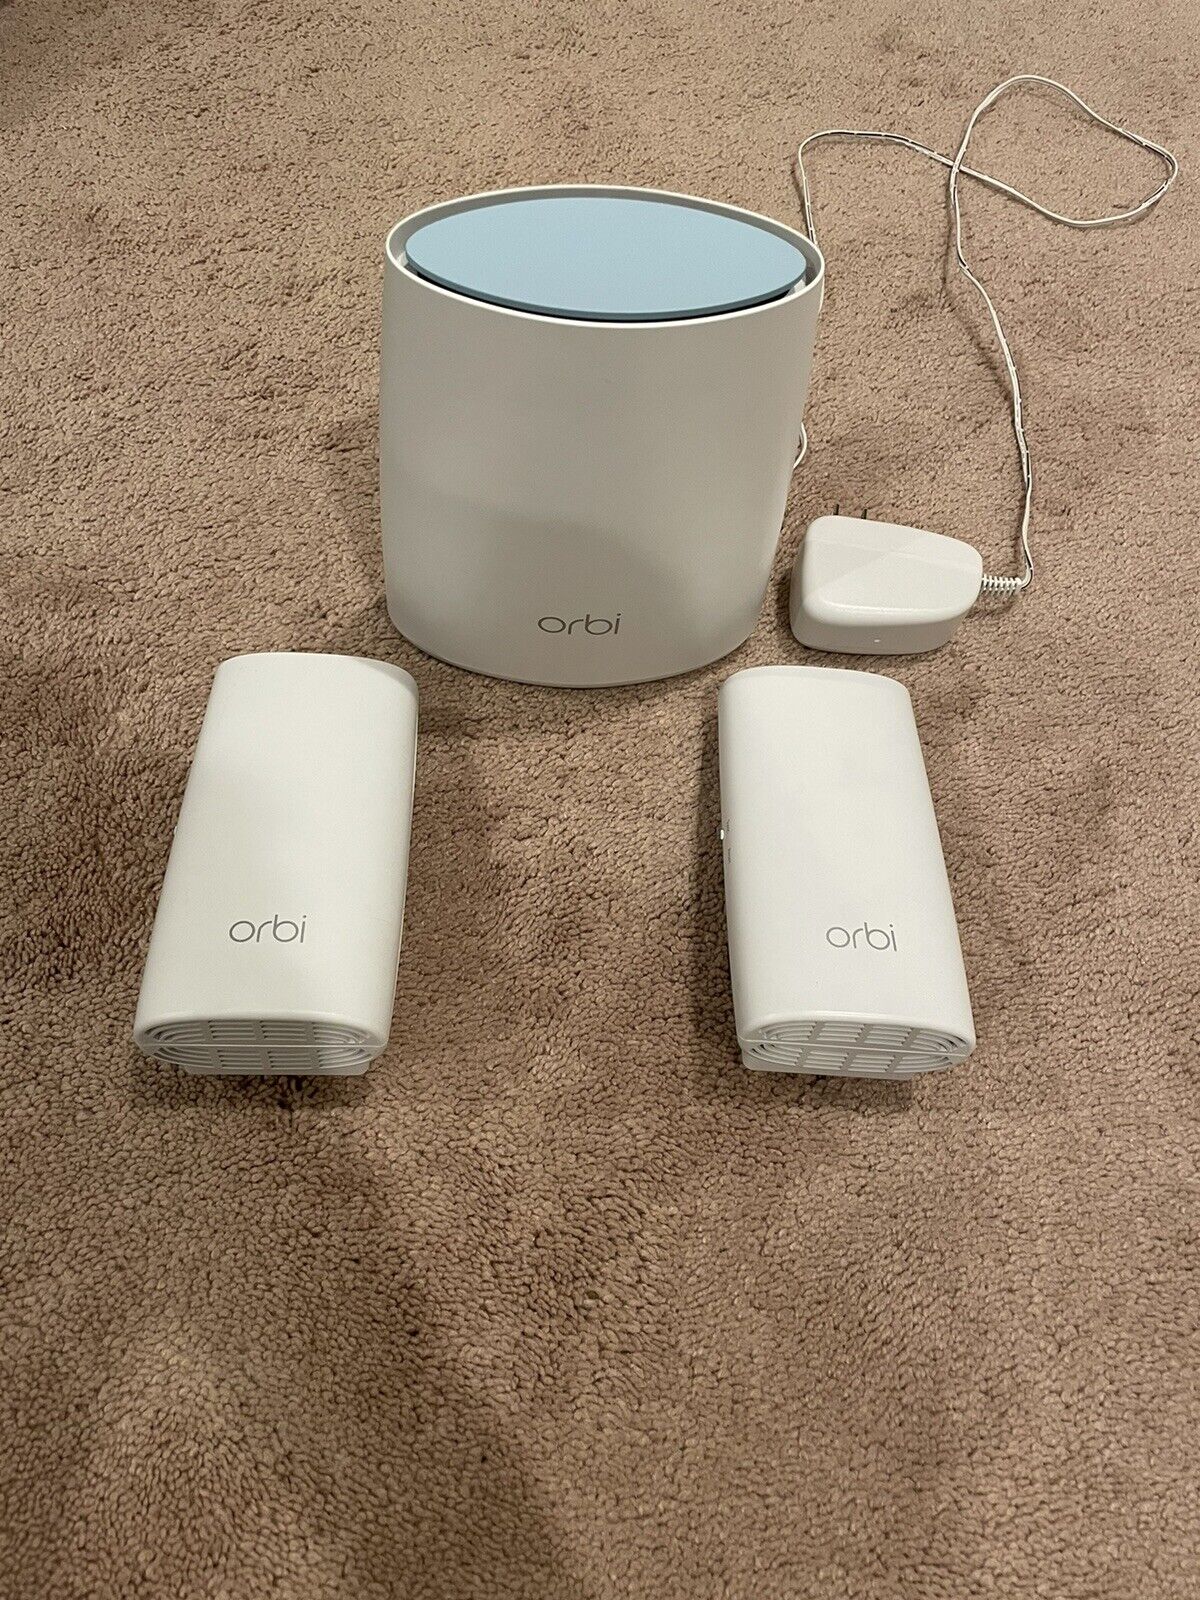 Netgear Orbi Router RBR40 with two RBW30 Orbi Wall Plug Satellites